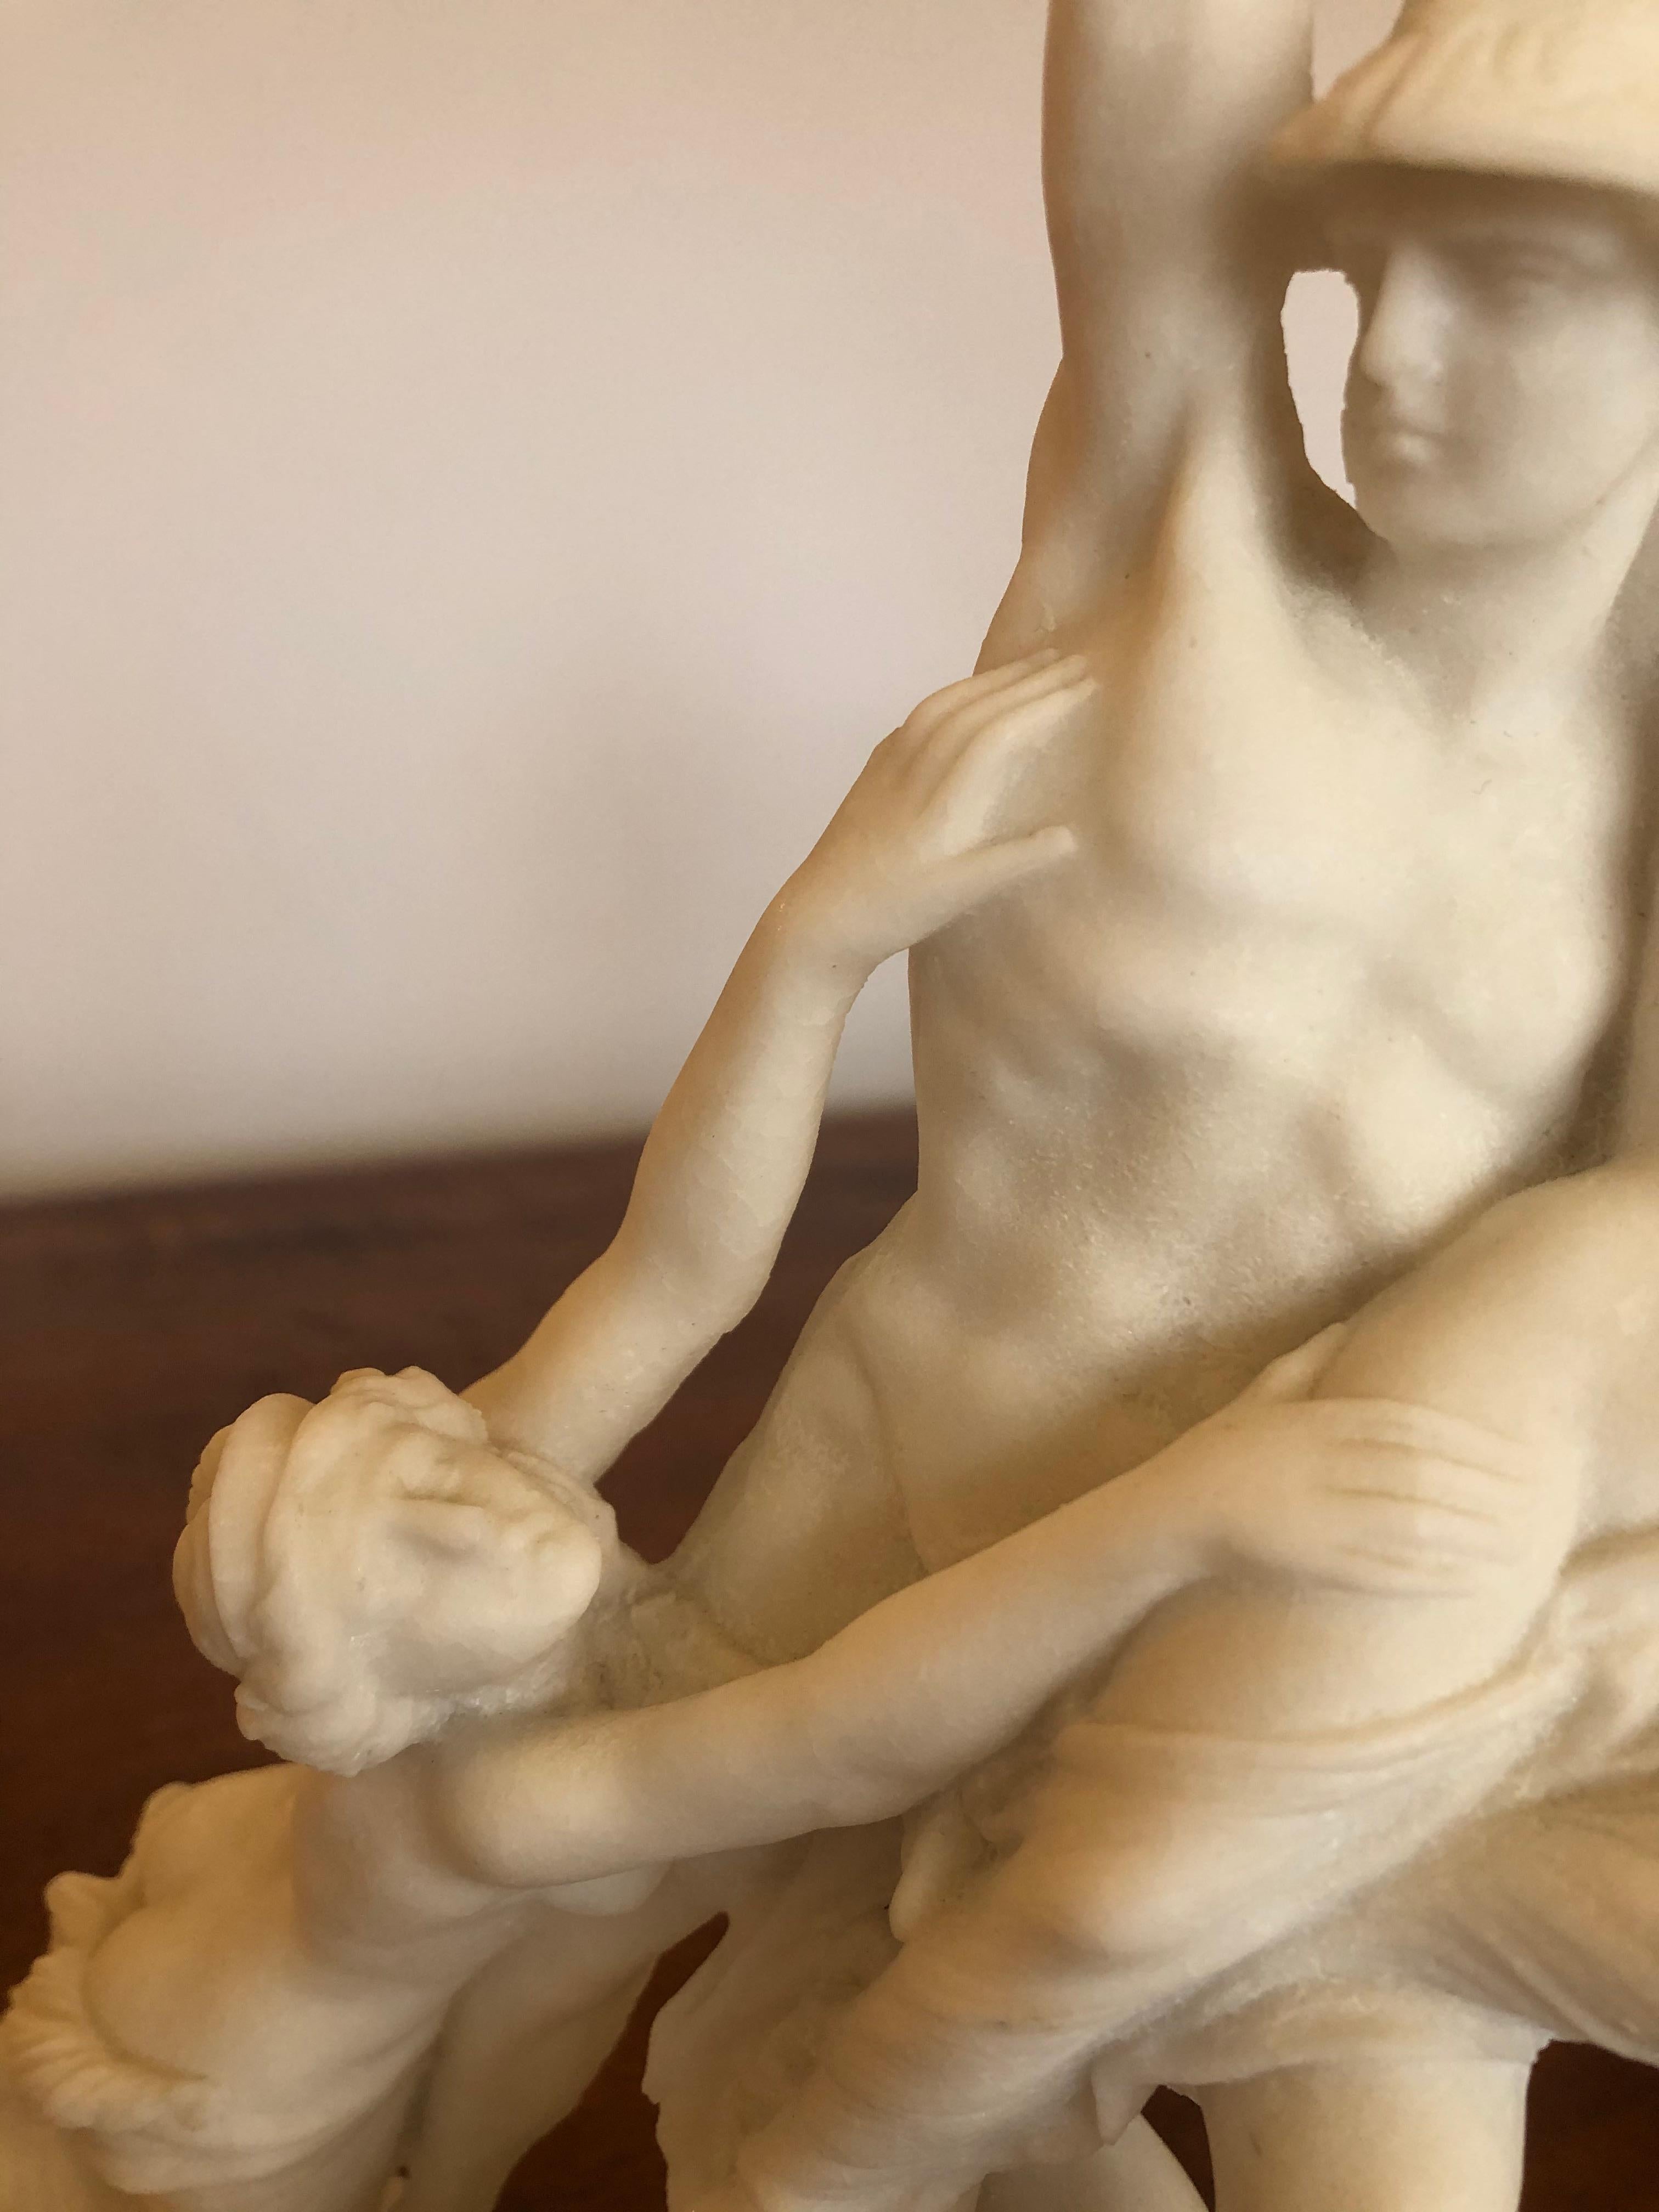 A magnificent meticulously detailed porcelain sculpture of intertwining passionate bodies. A true object d'arte.